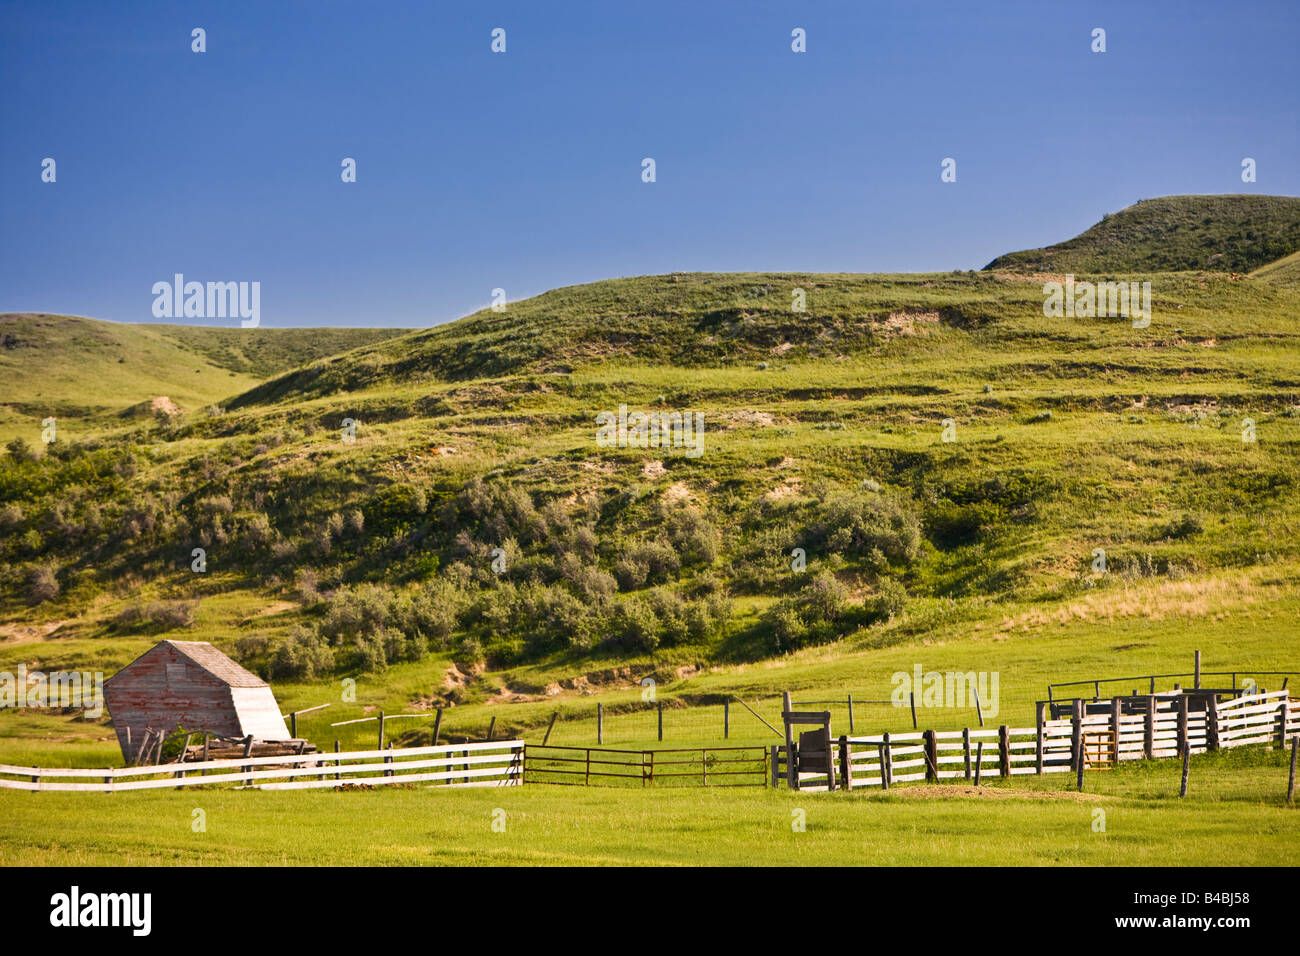 Old shed on a lean along Highway 18 in the Big Muddy Badlands region of Southern Saskatchewan, Canada. Stock Photo